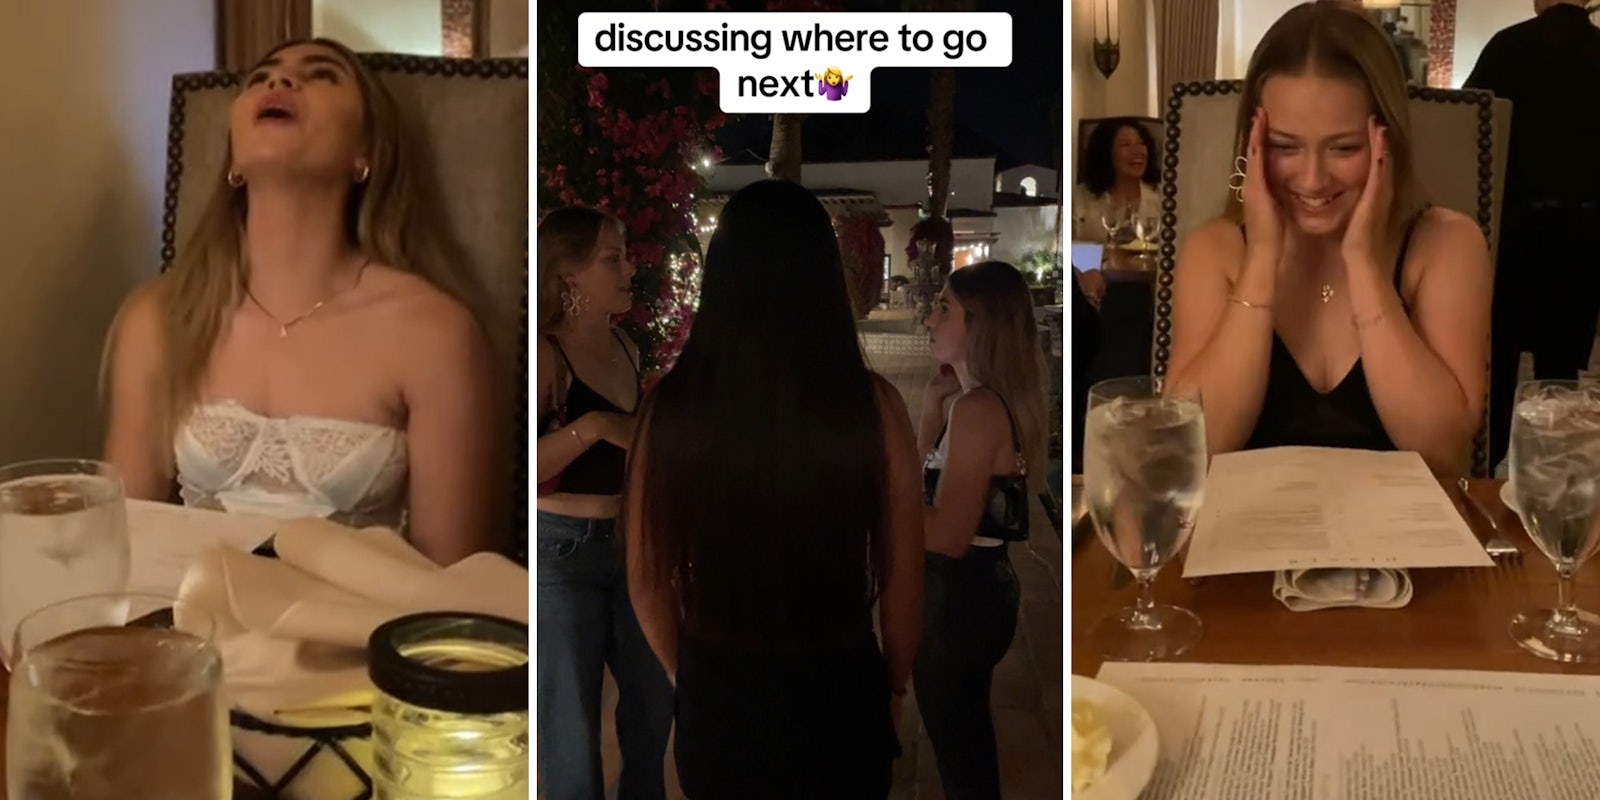 Women have to leave restaurant after being seated because it’s too expensive